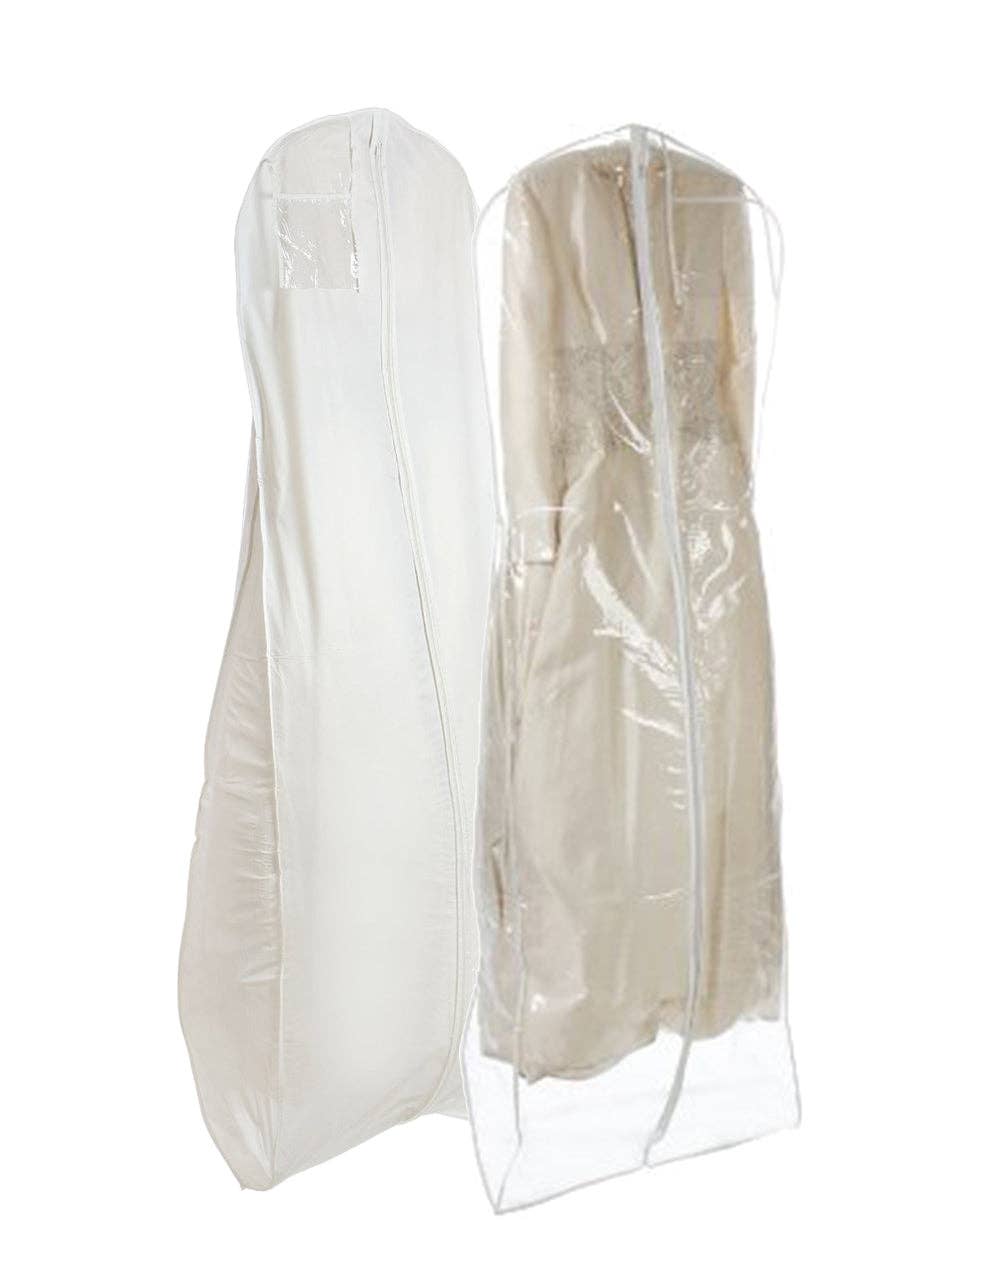 Wholesale Wedding Dress Garment Bags For Bridal Gown And Long